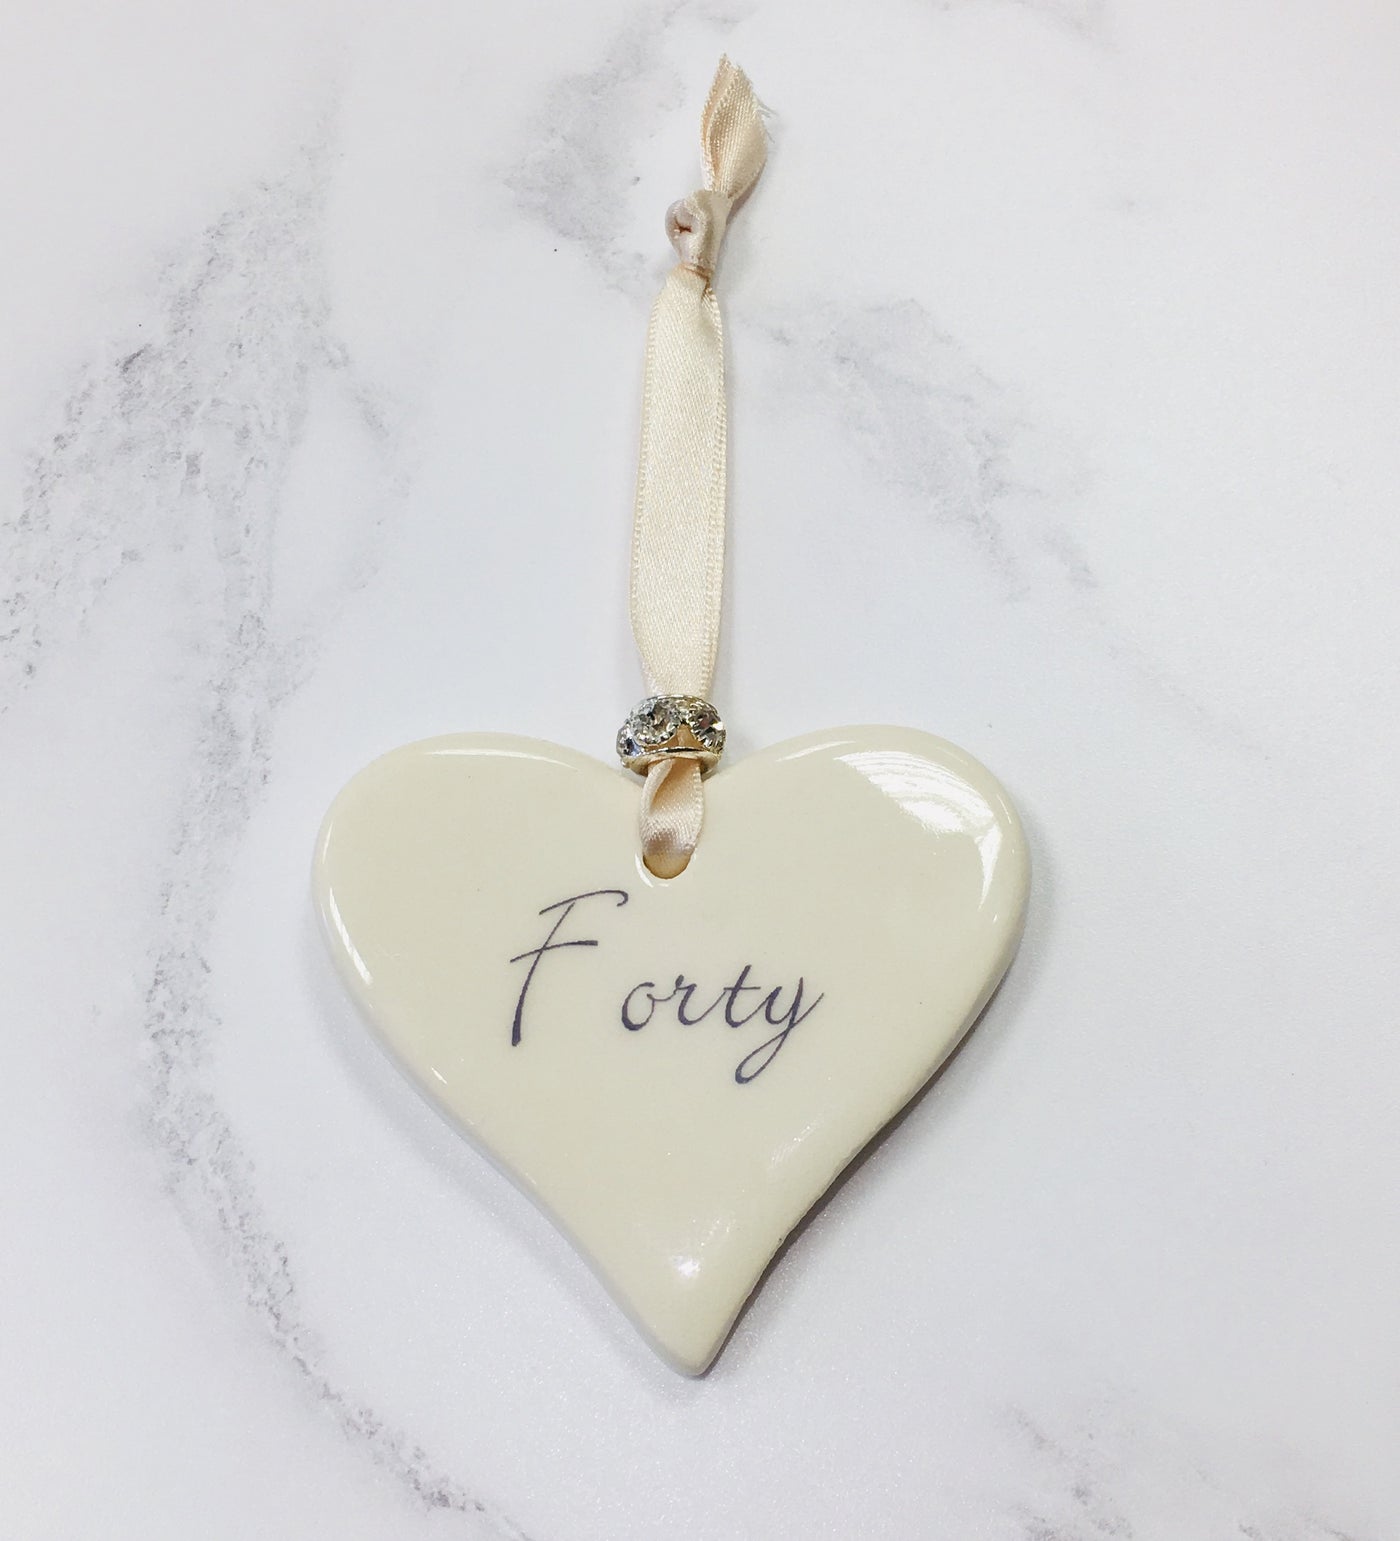 Dimbleby Ceramics Sentiment Hanging Heart - Forty